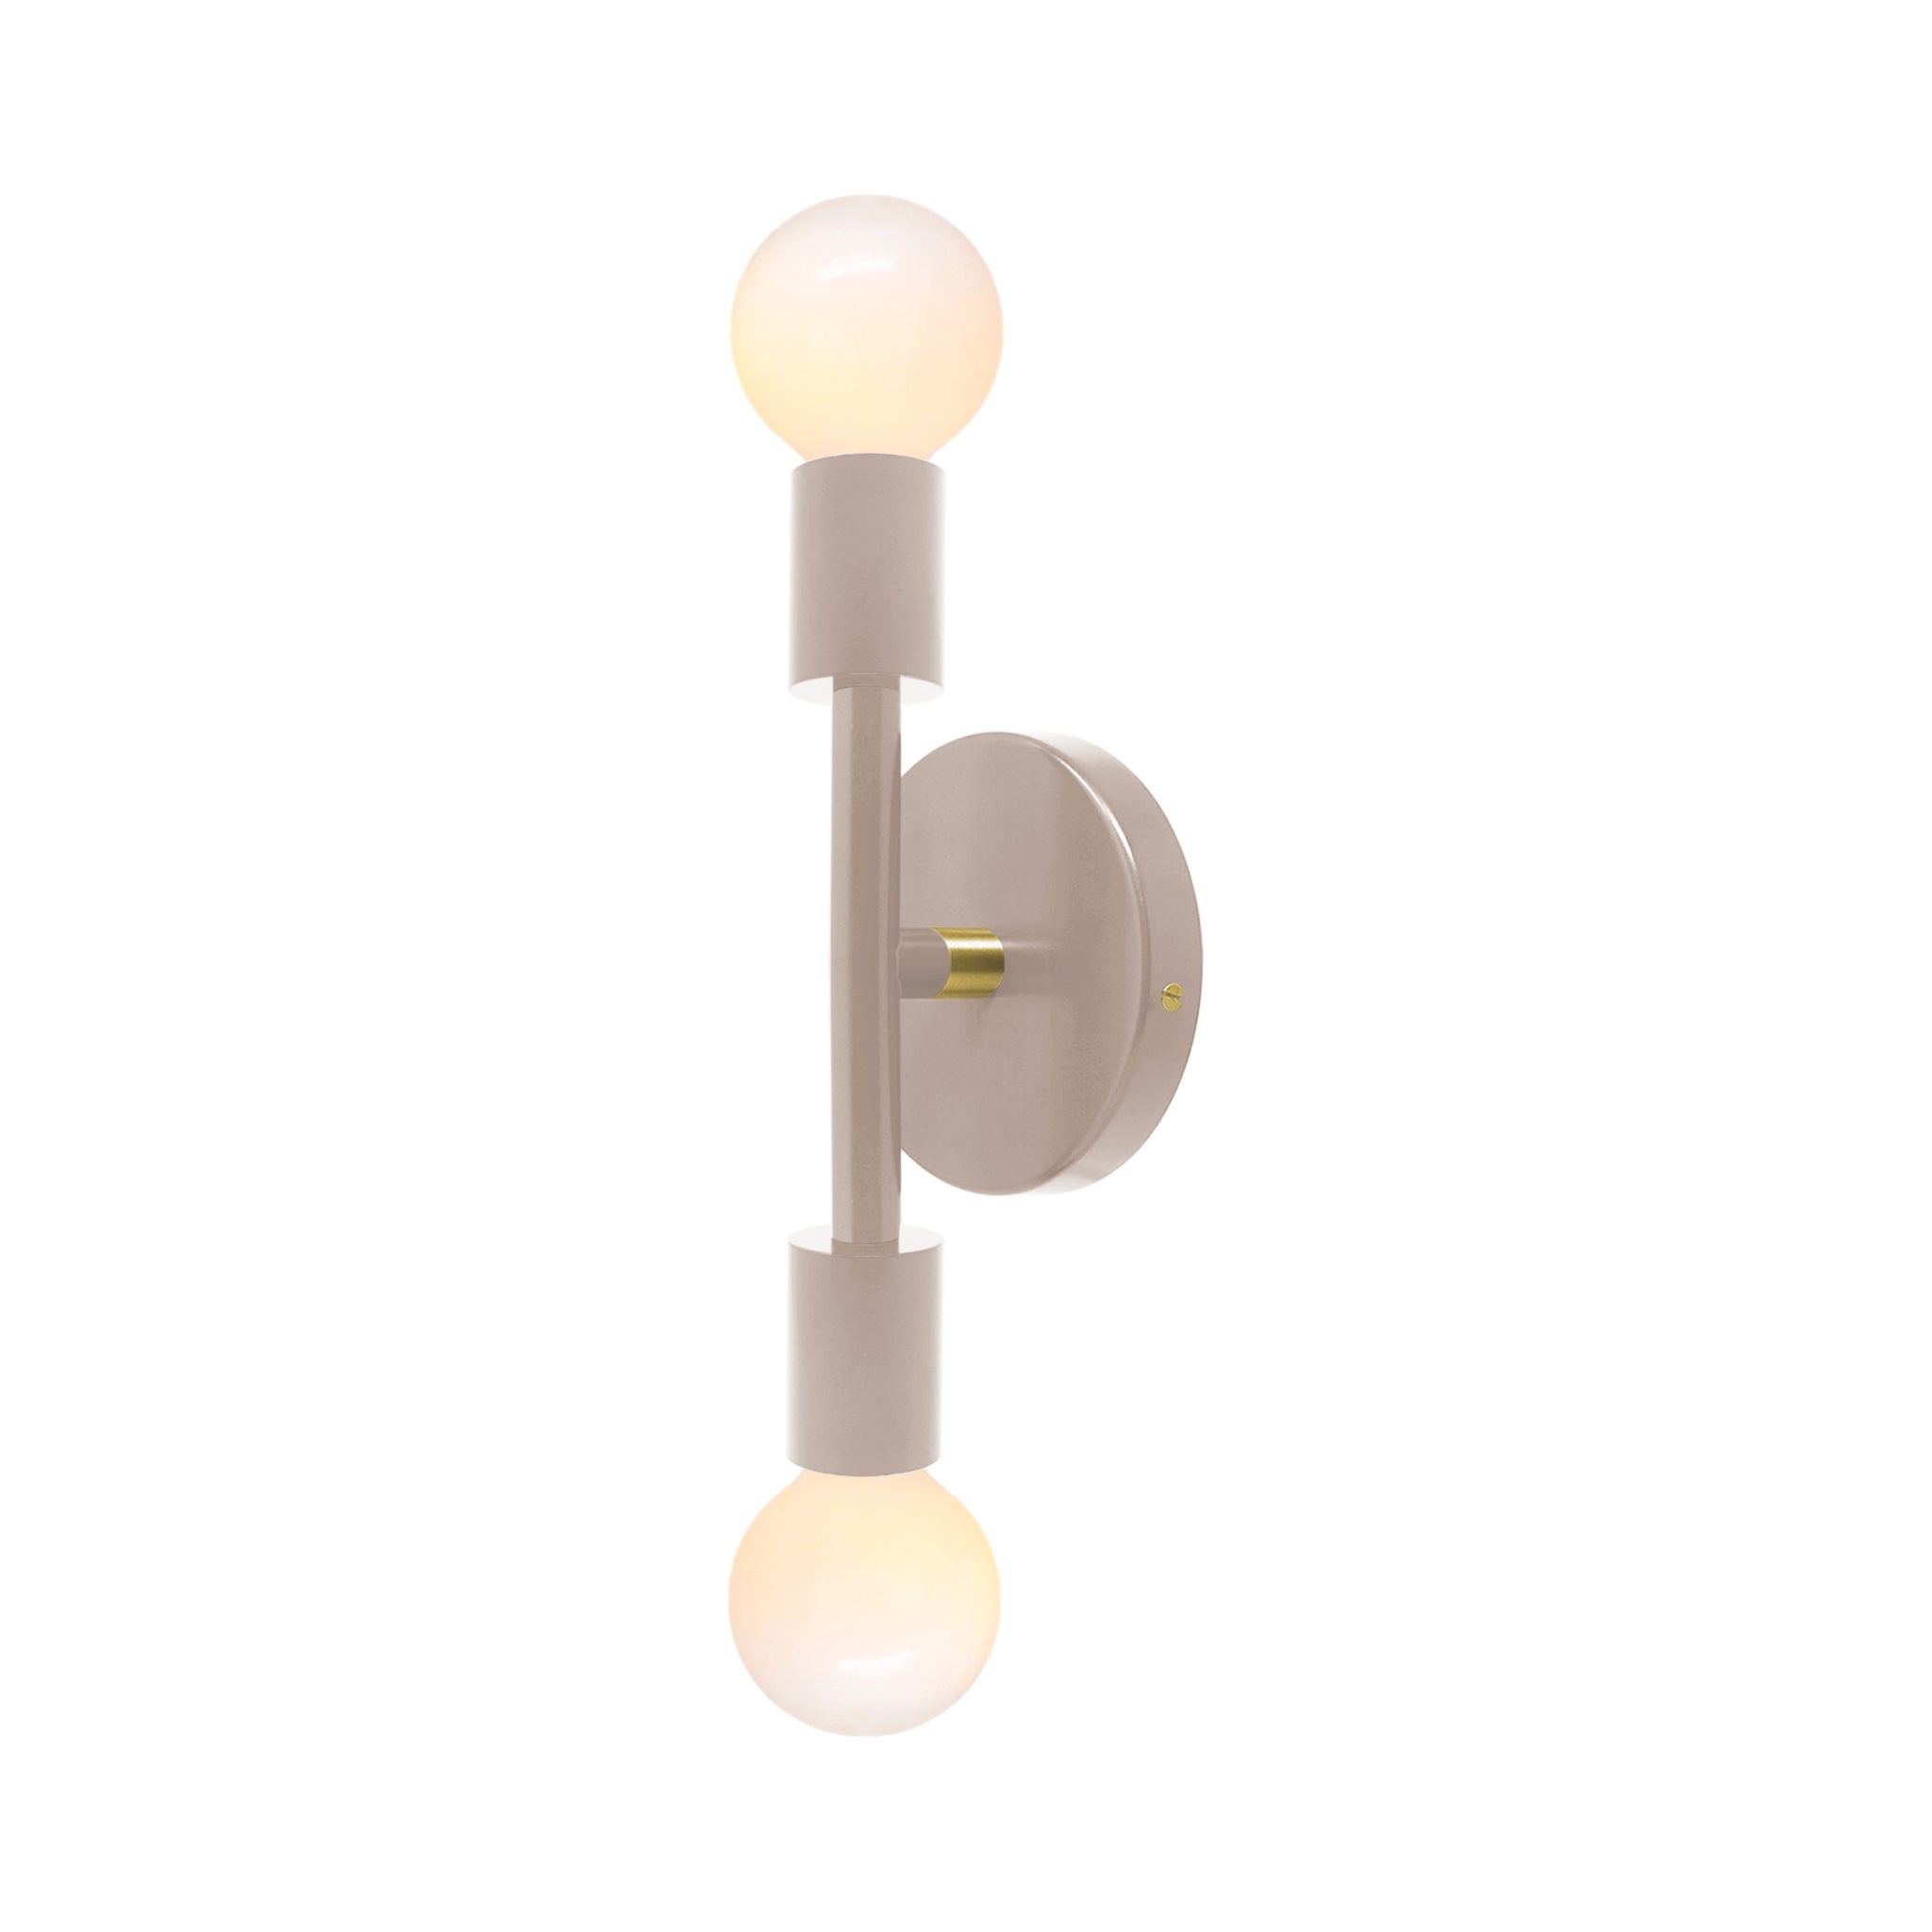 Brass and barely color Pilot sconce 11" Dutton Brown lighting